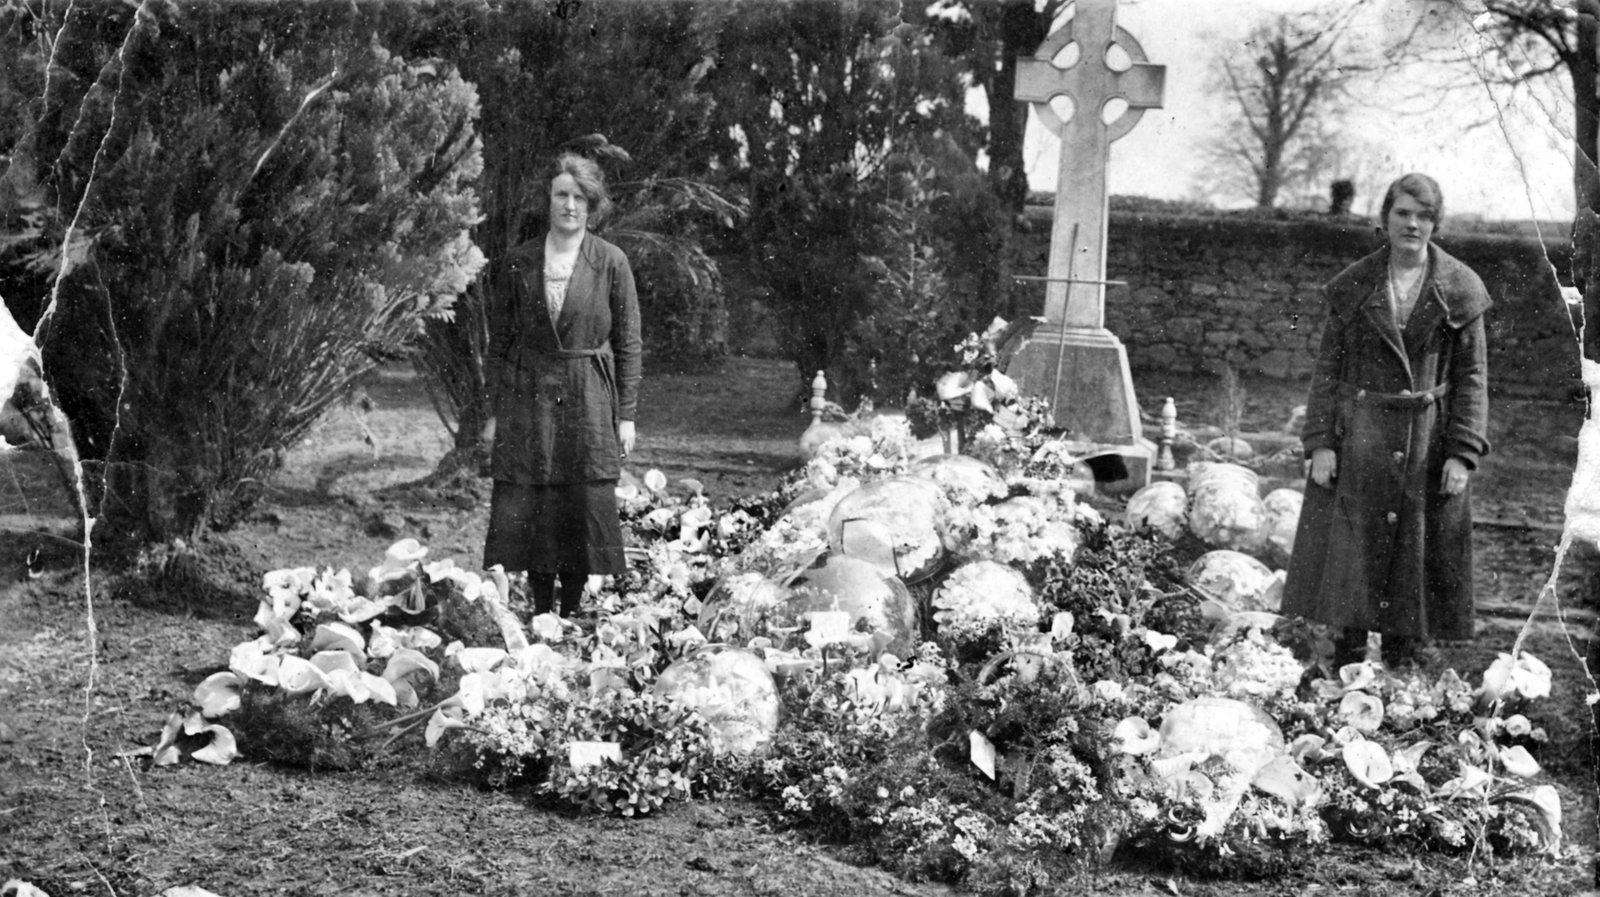 Image - Liam Lynch's grave, Fermoy. (Credit: Waterford County Museum)